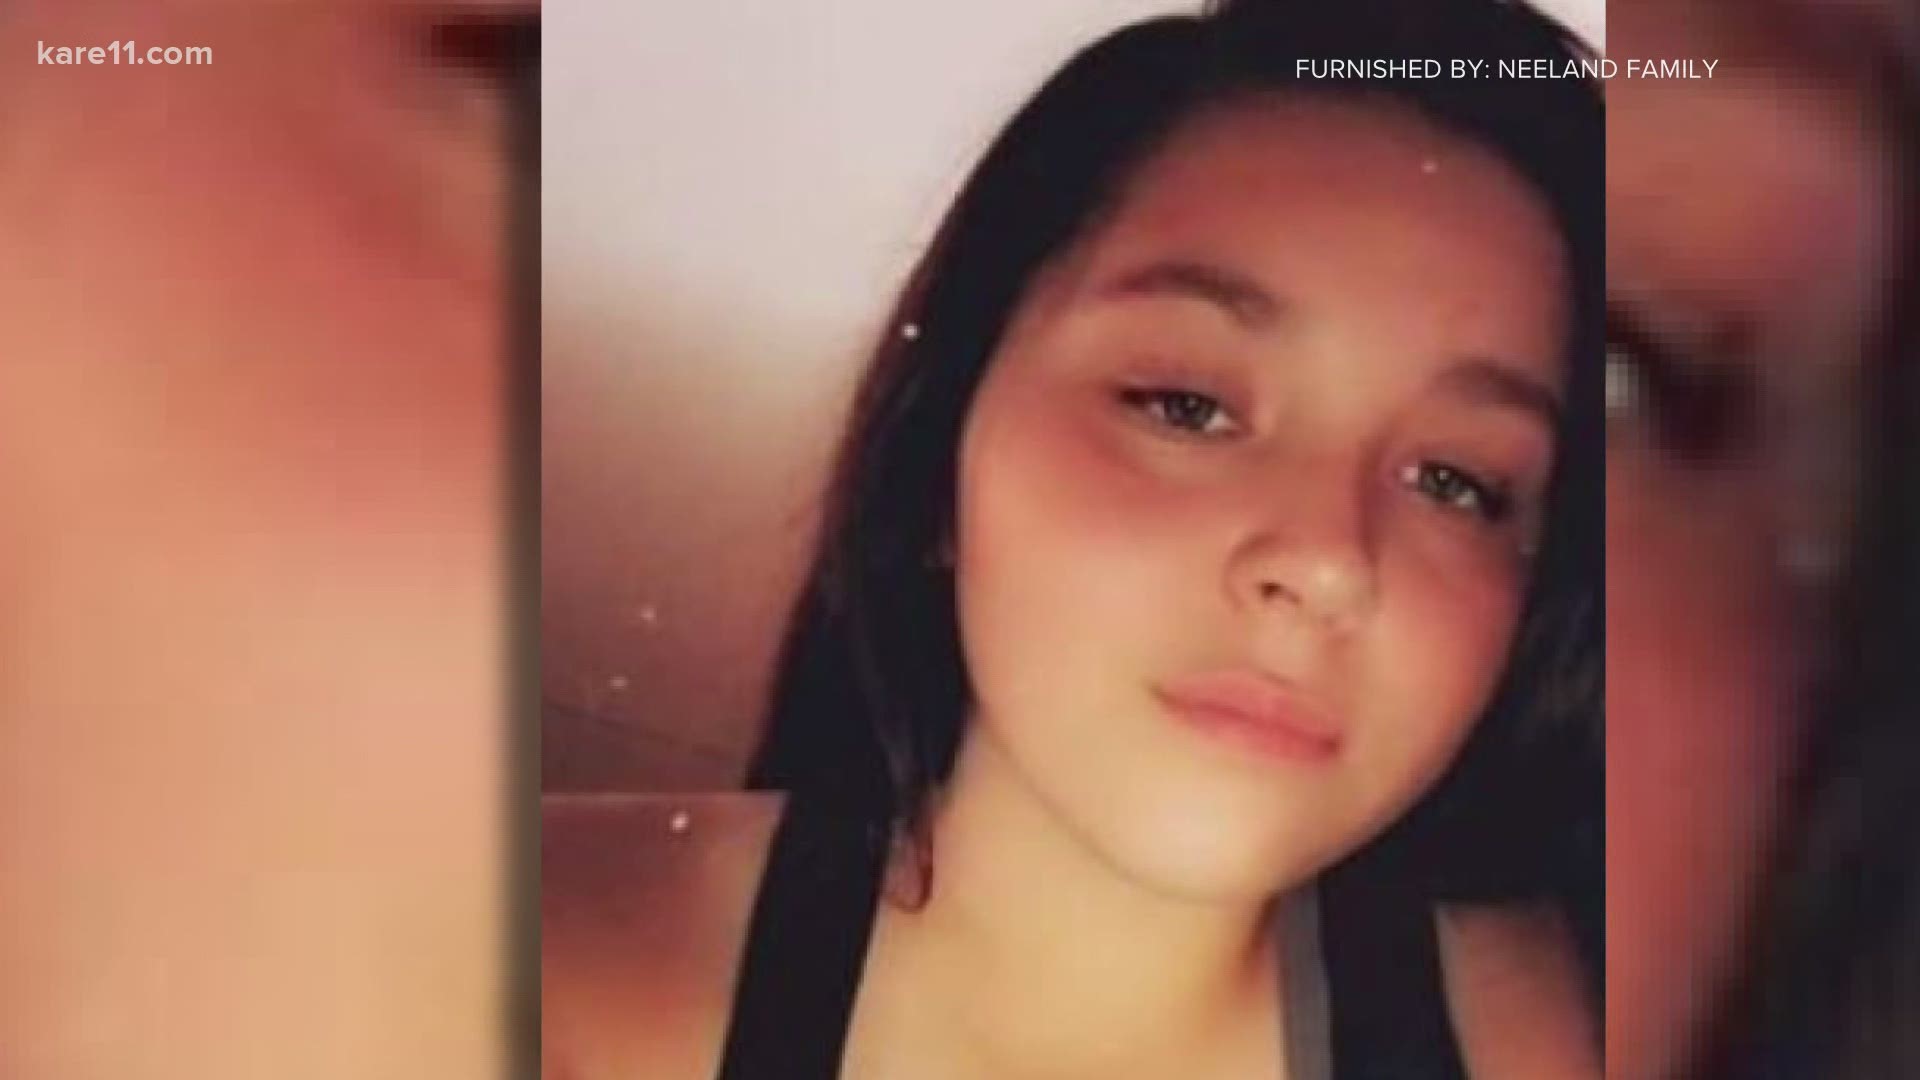 An 18-year-old woman has drowned in a northwestern Minnesota lake after saving several children from turbulent water, according to Clearwater County authorities.